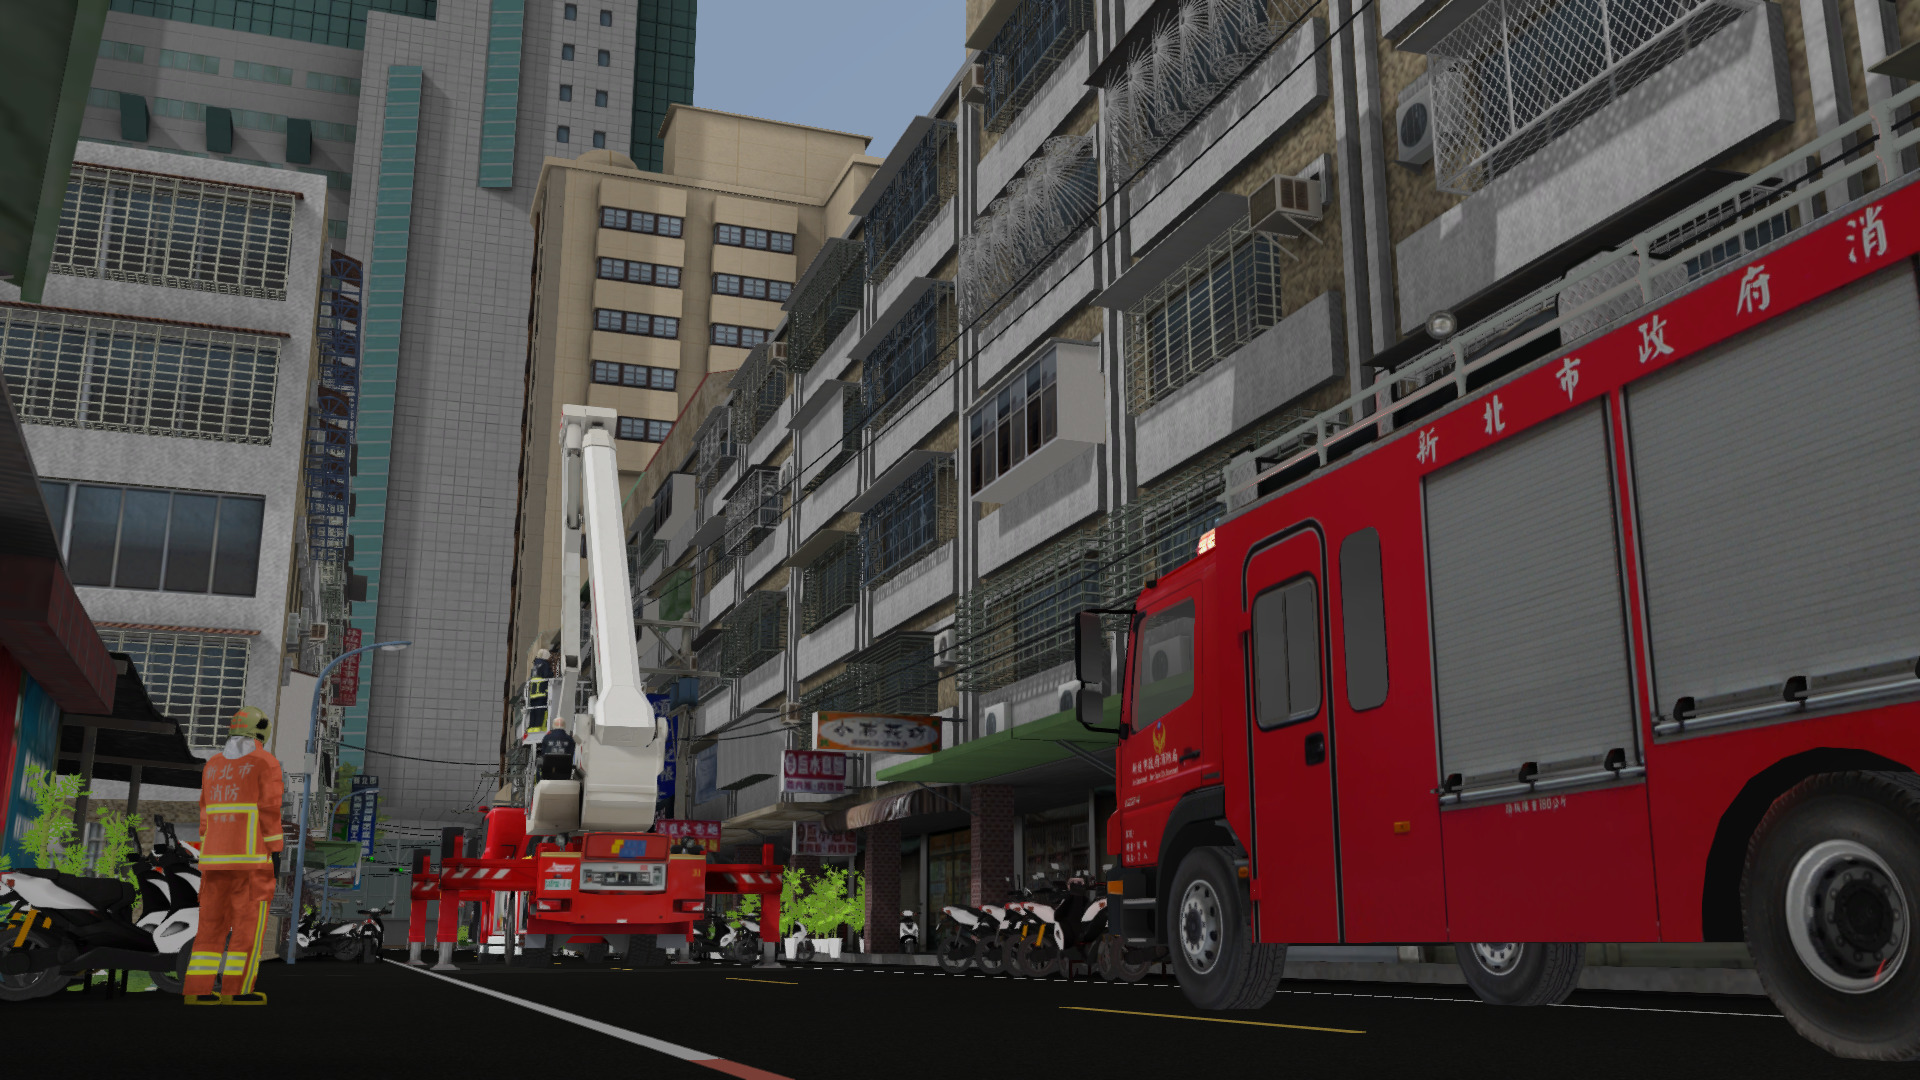 Aerial platform deploying at a residential fire in a geospecific area of New Taipei during simulation training.